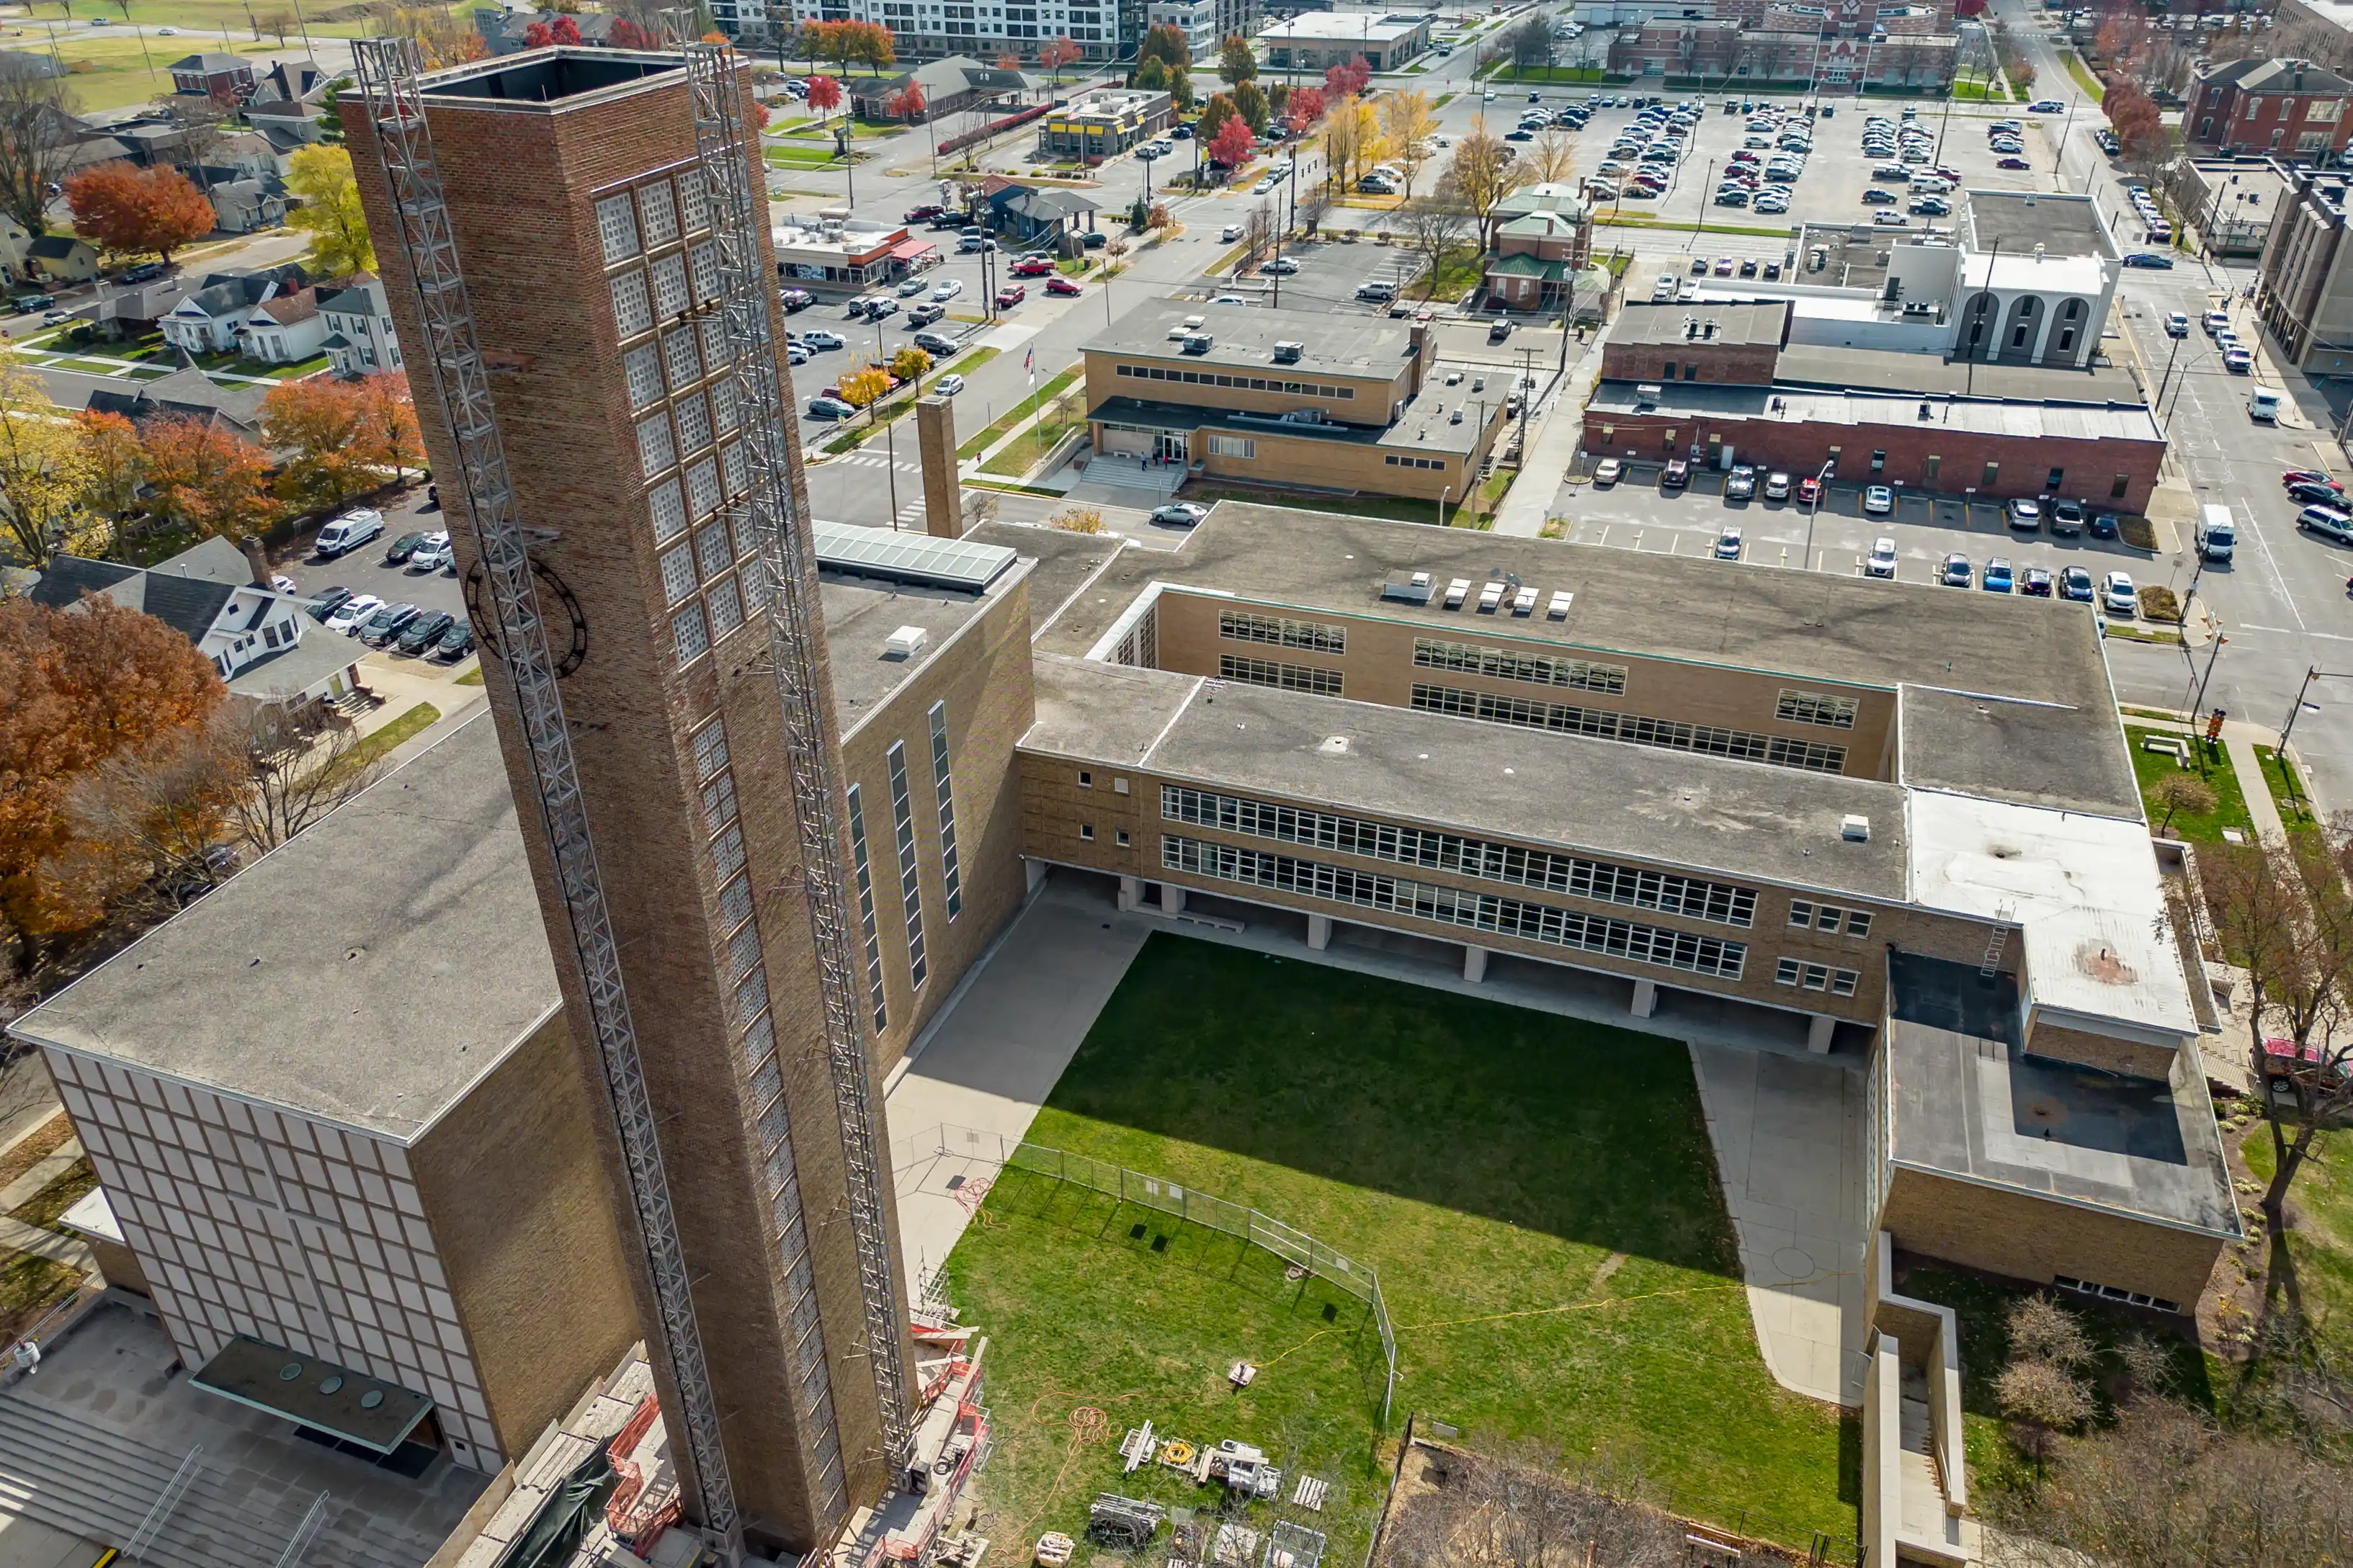 Aerial view of a tall brick chimney attached to a large building with adjacent parking lots and surrounding streets in an urban area.